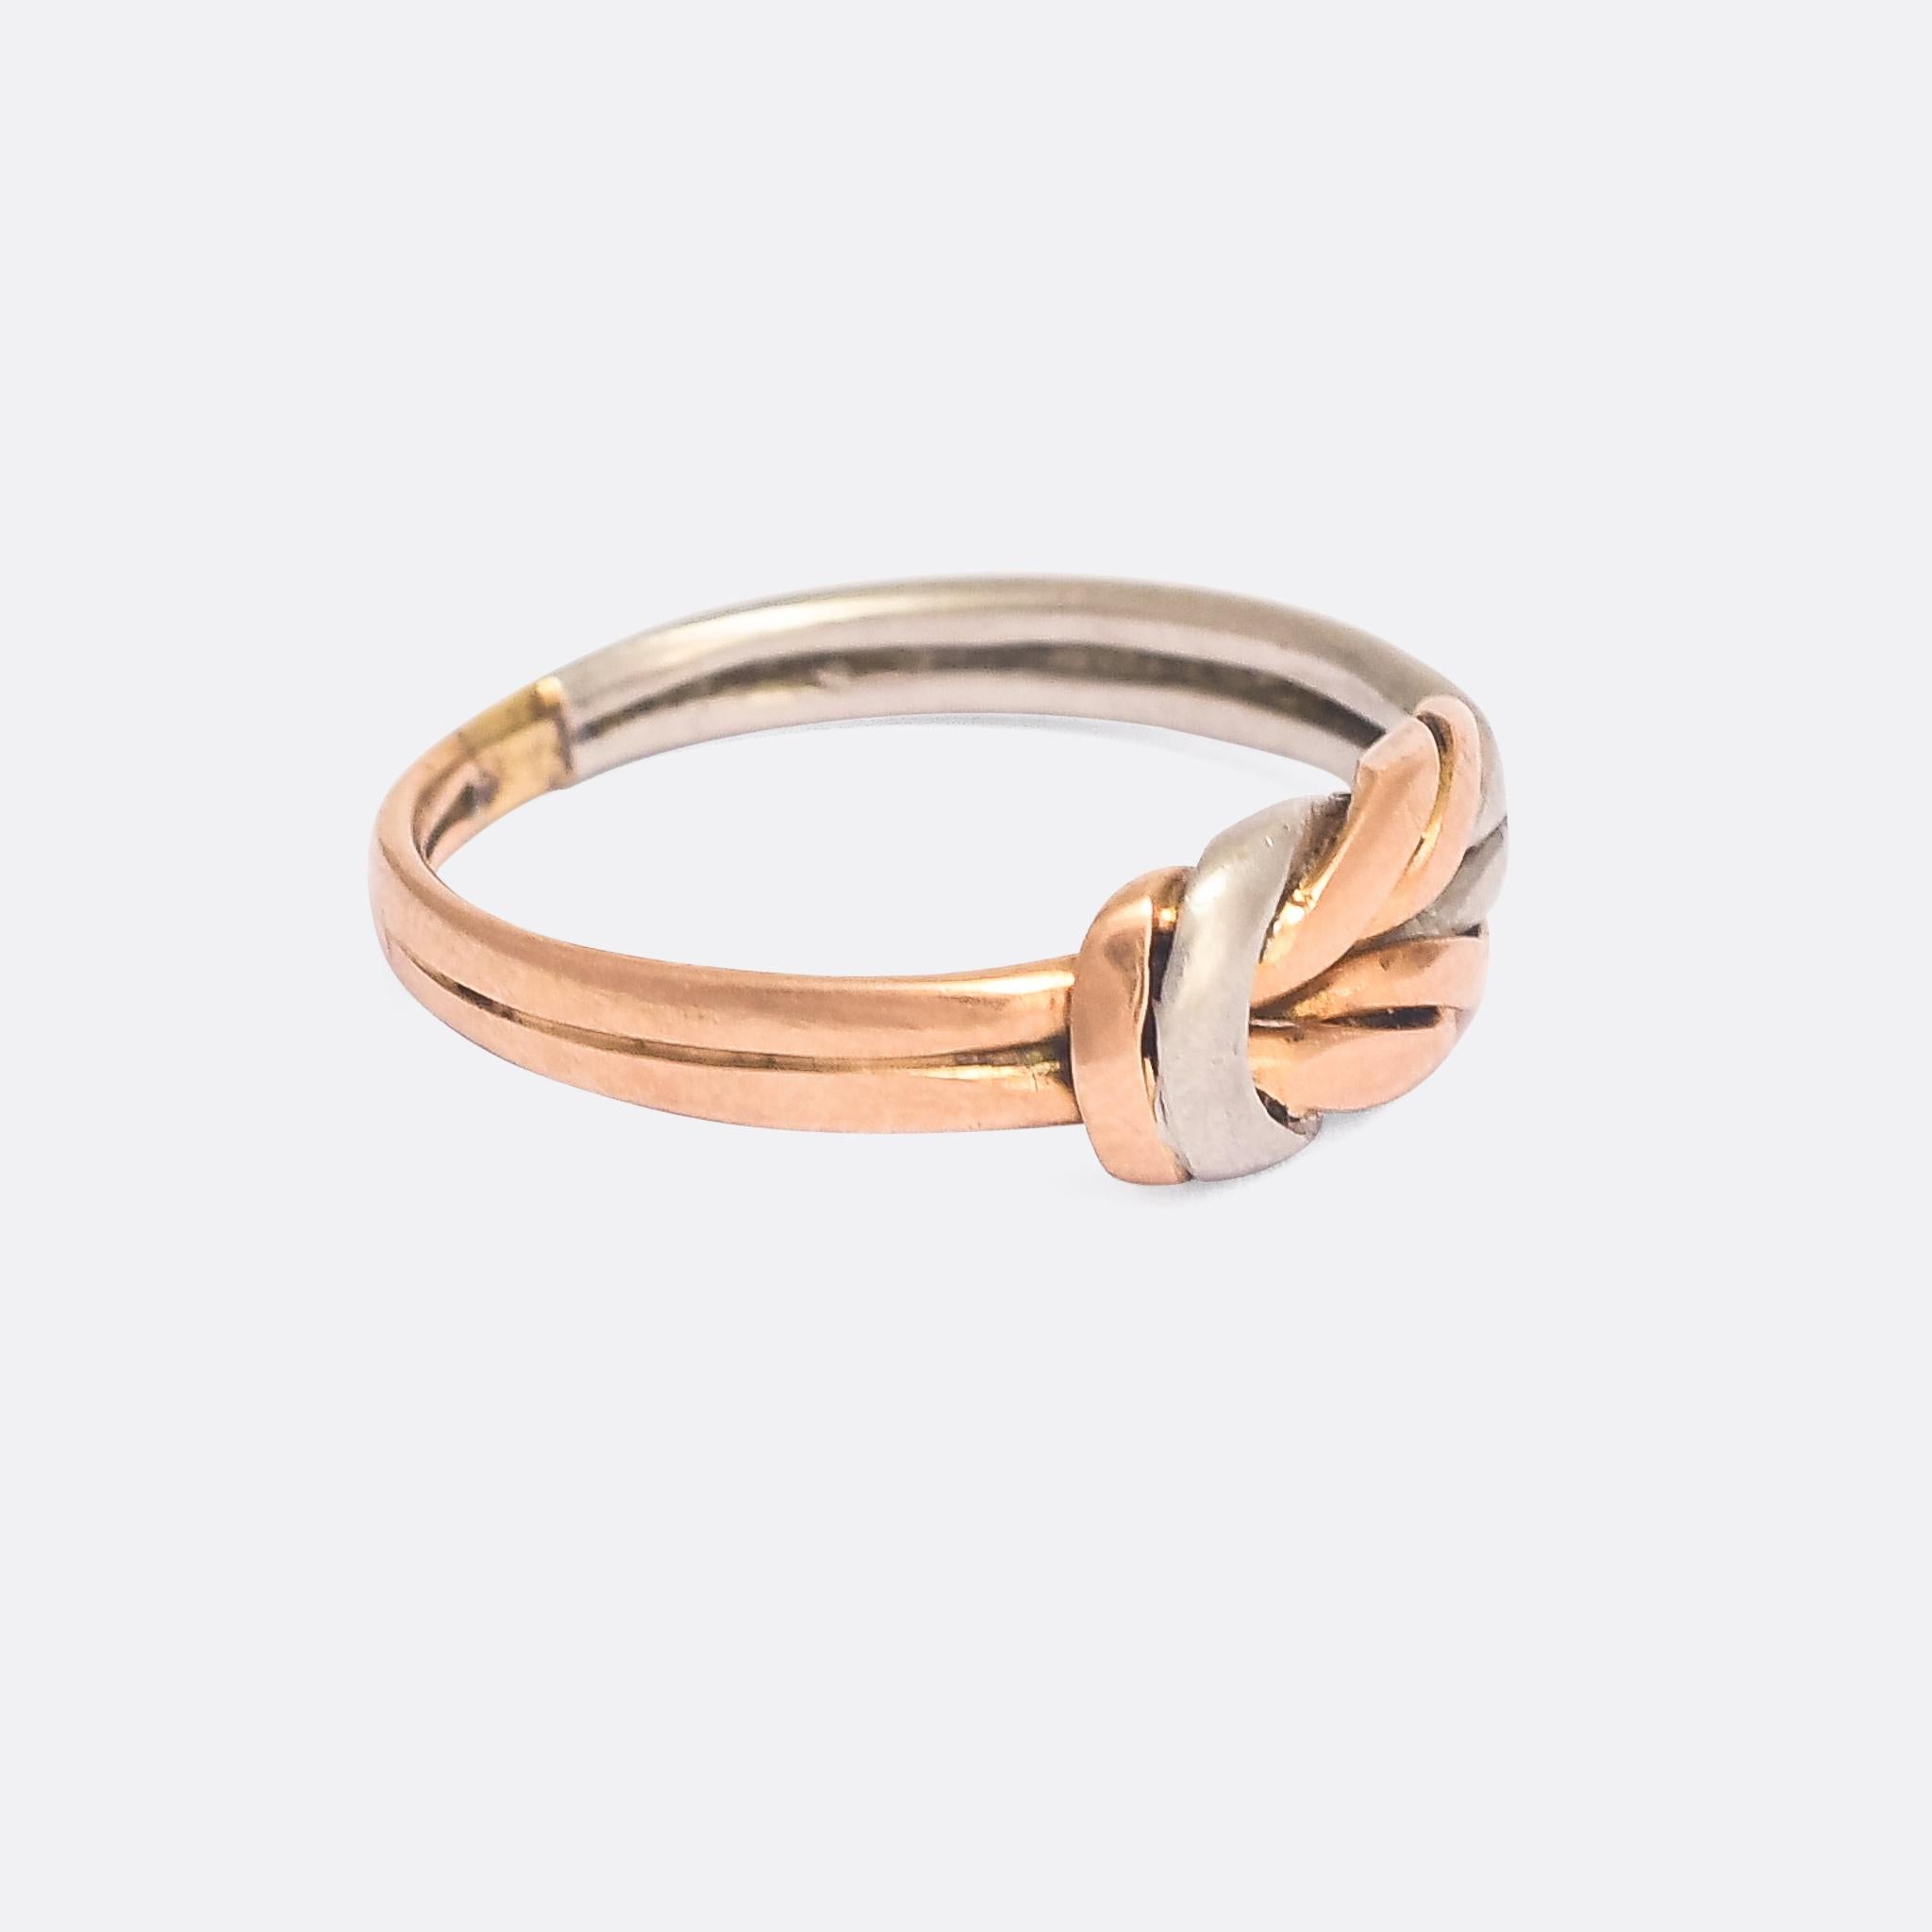 A superb Edwardian period lover's knot ring in 18k rose gold and platinum. It dates from the early 20th century, and appears to be formed as some sort of variant of a square knot - perhaps some sailors/anglers could help identify? It's beautifully